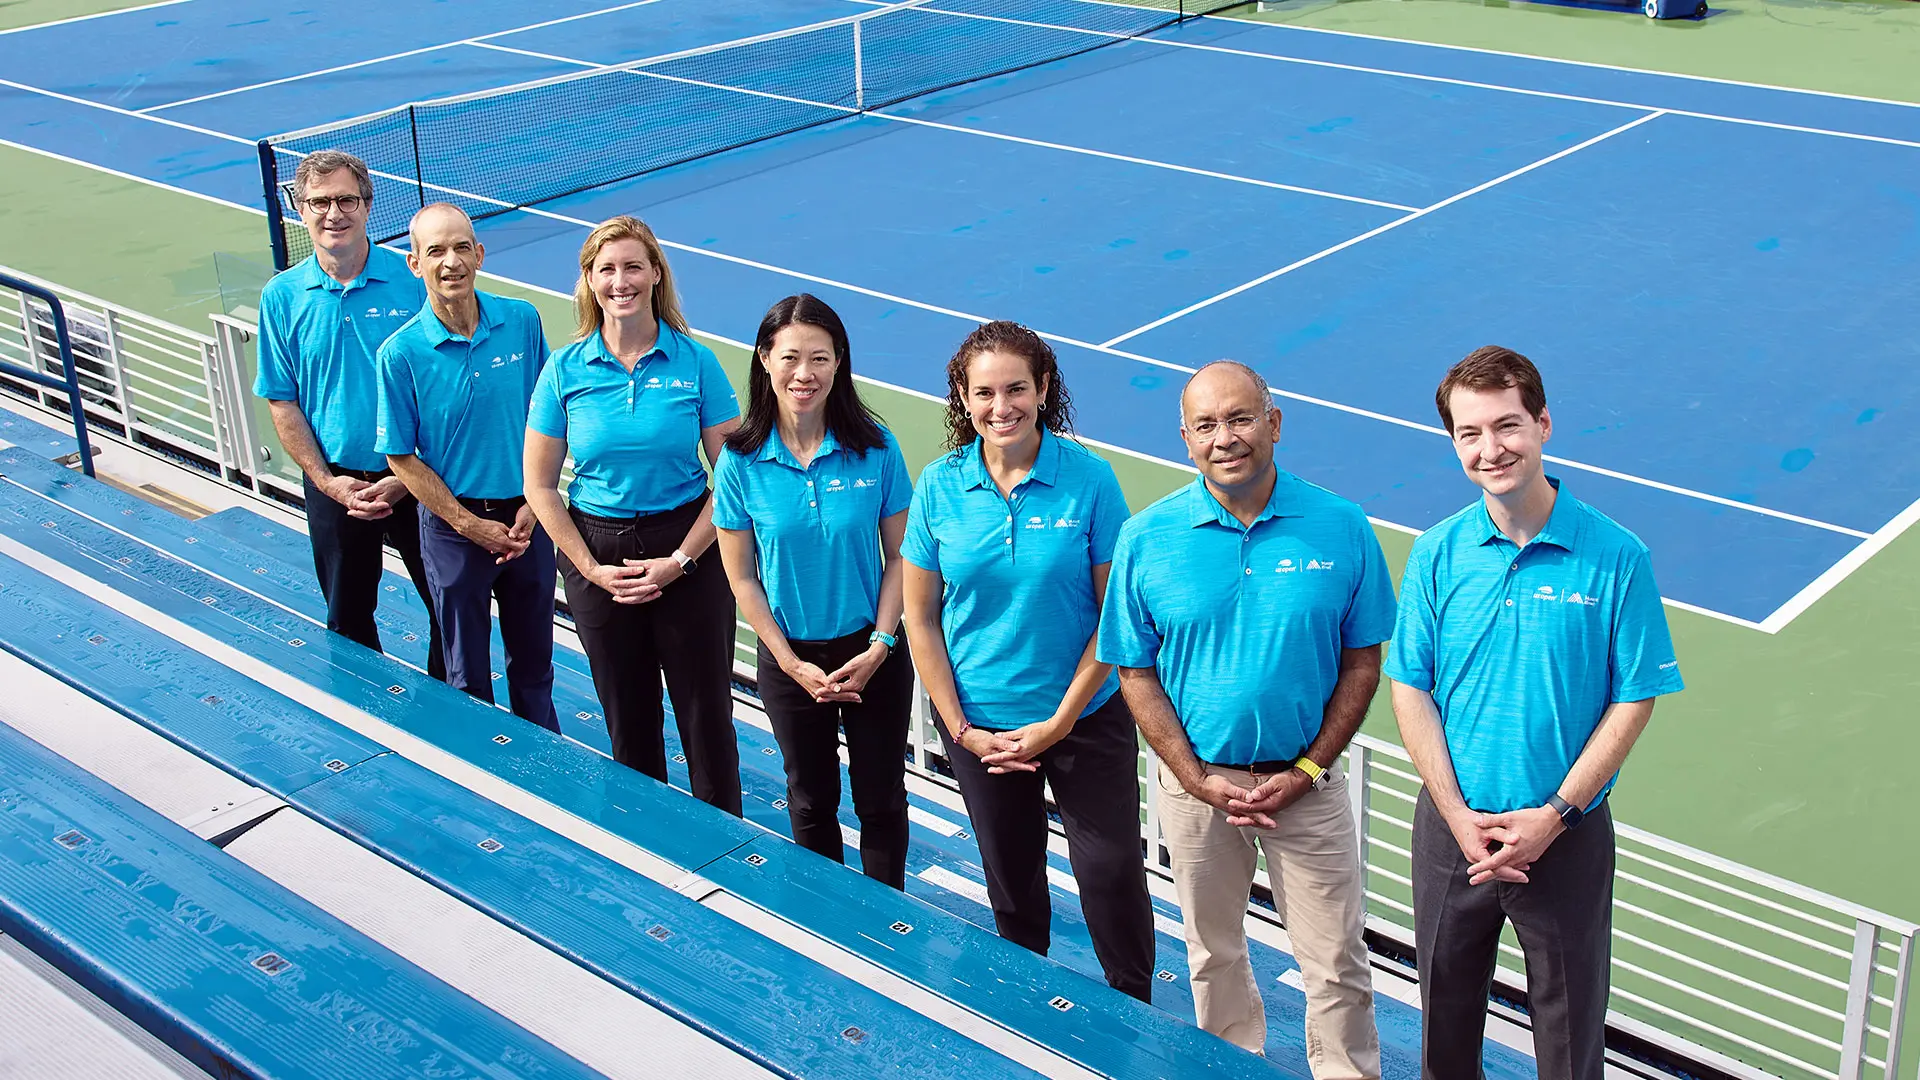 Dr. Colvin, center, stands with her team of Mount Sinai orthopedists at the 2023 US Open in Queens, New York.